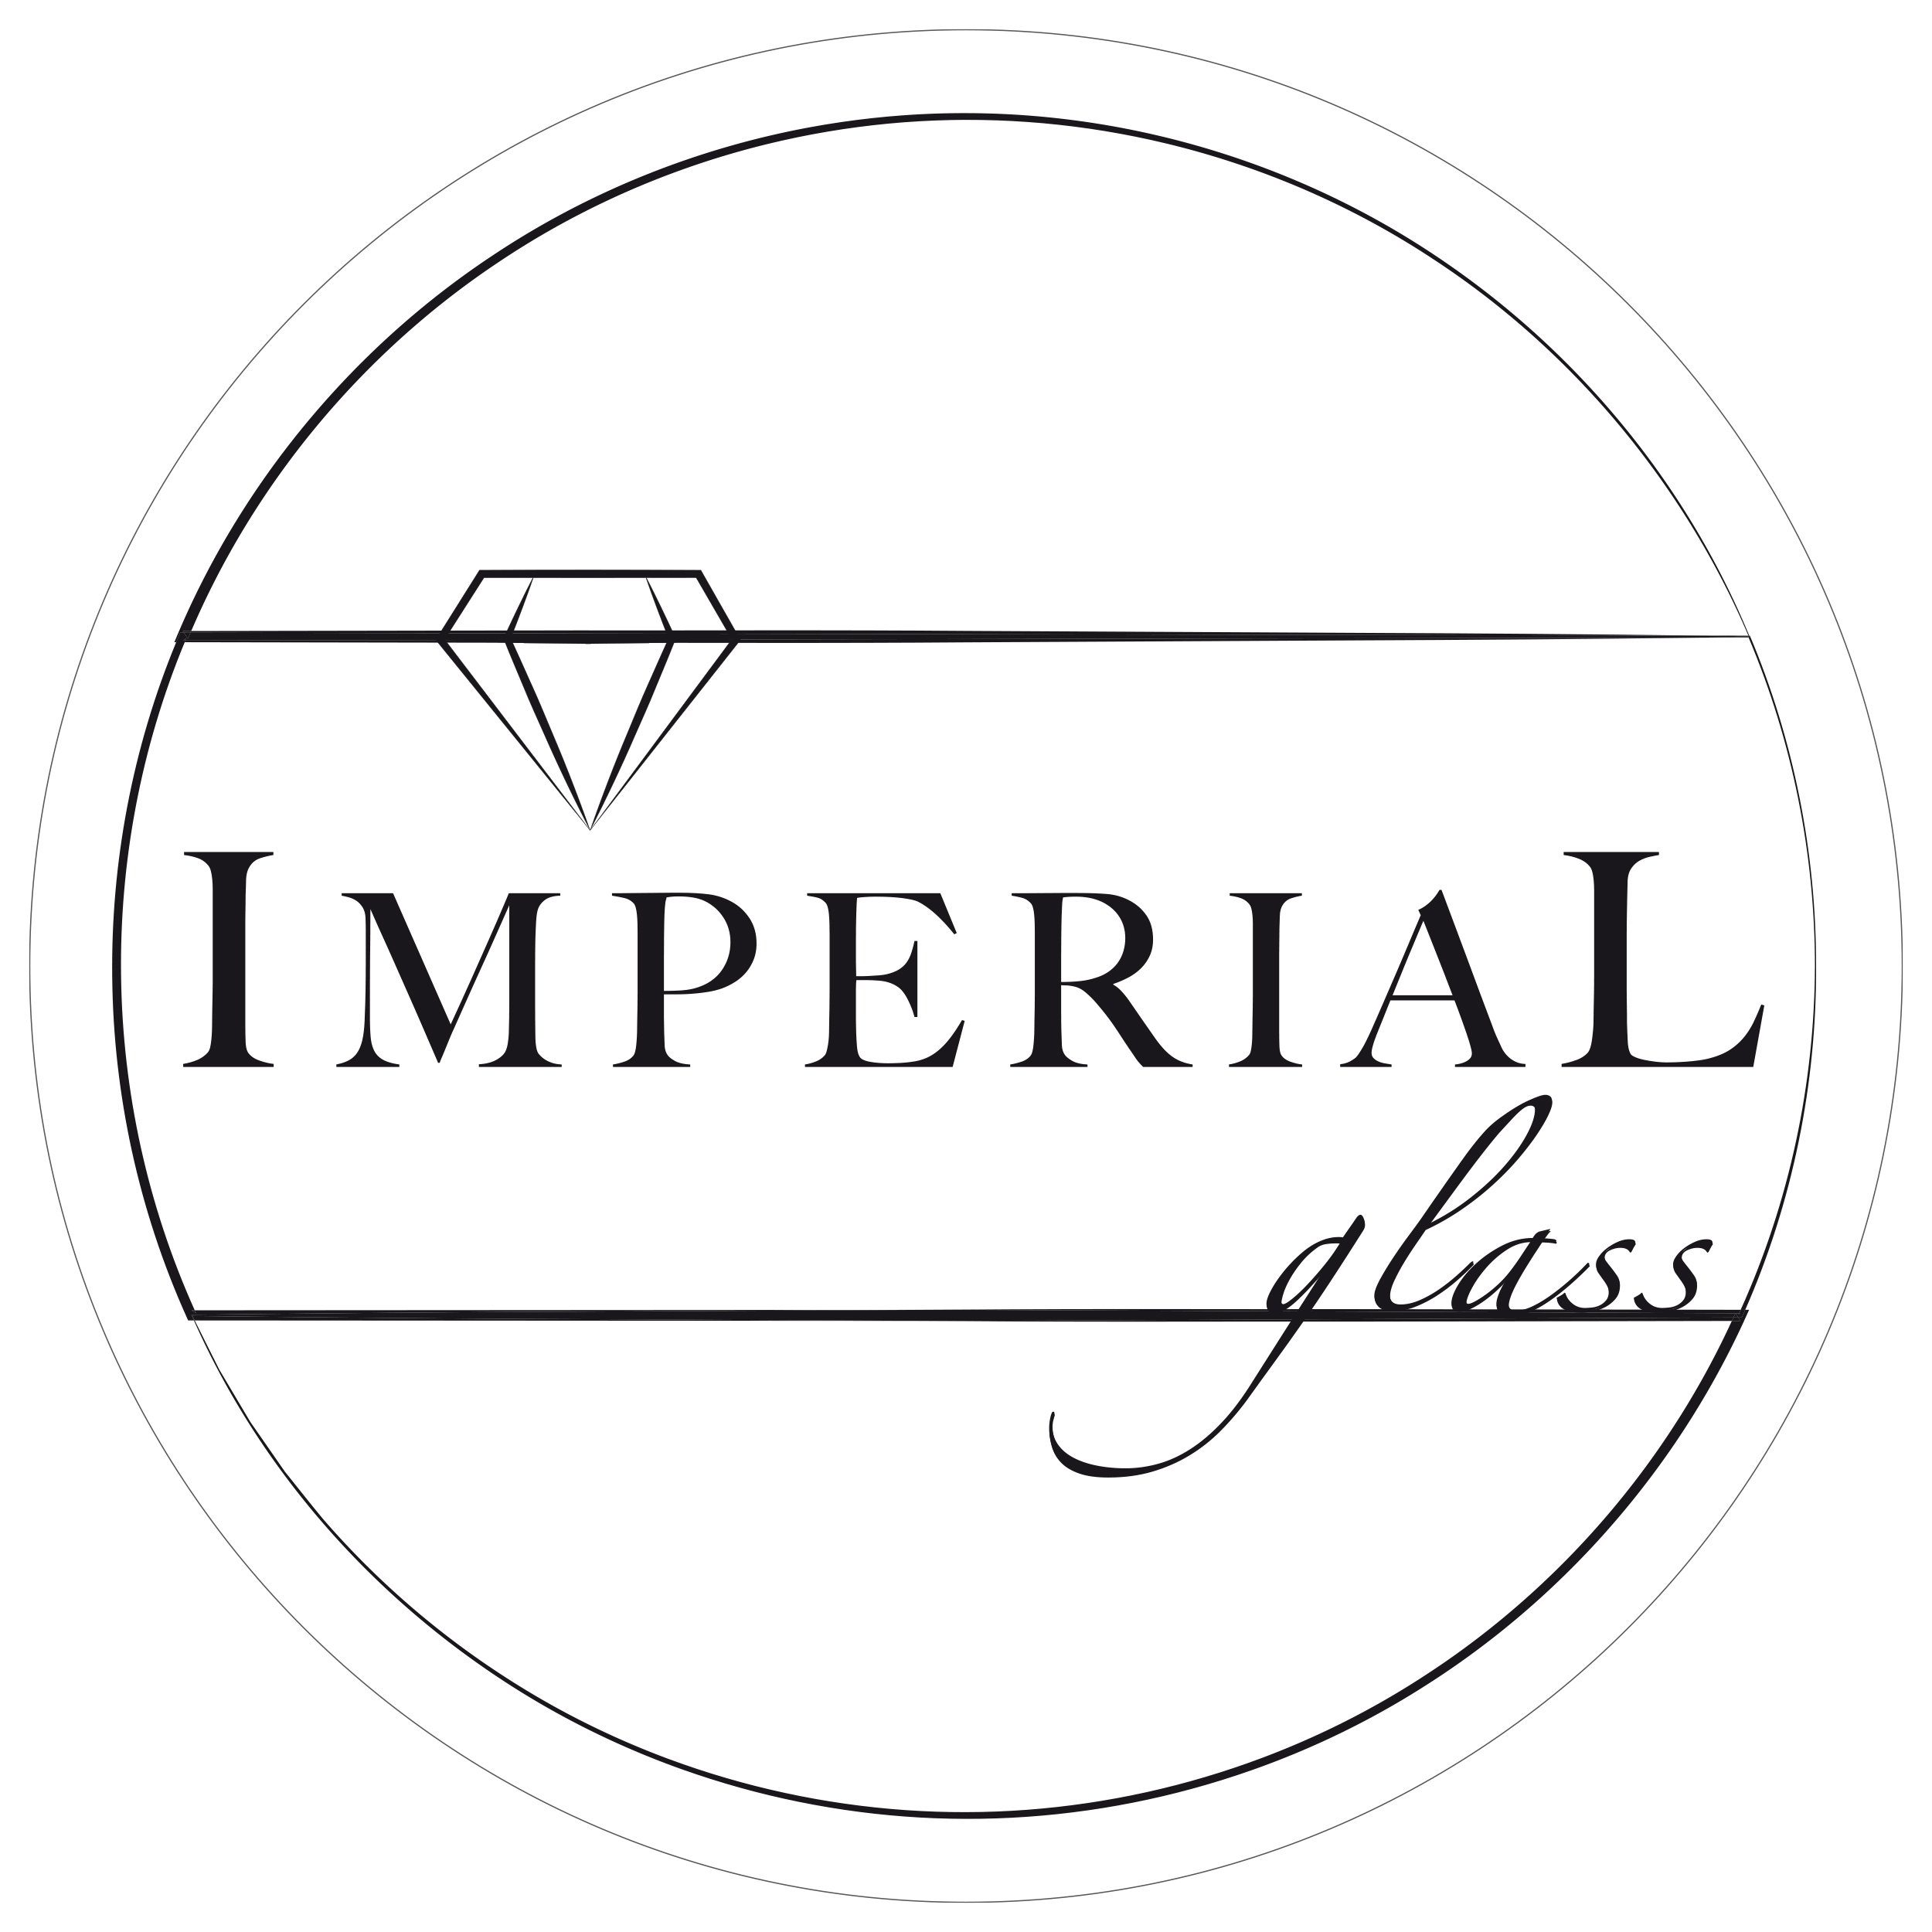 IMPERIAL glass